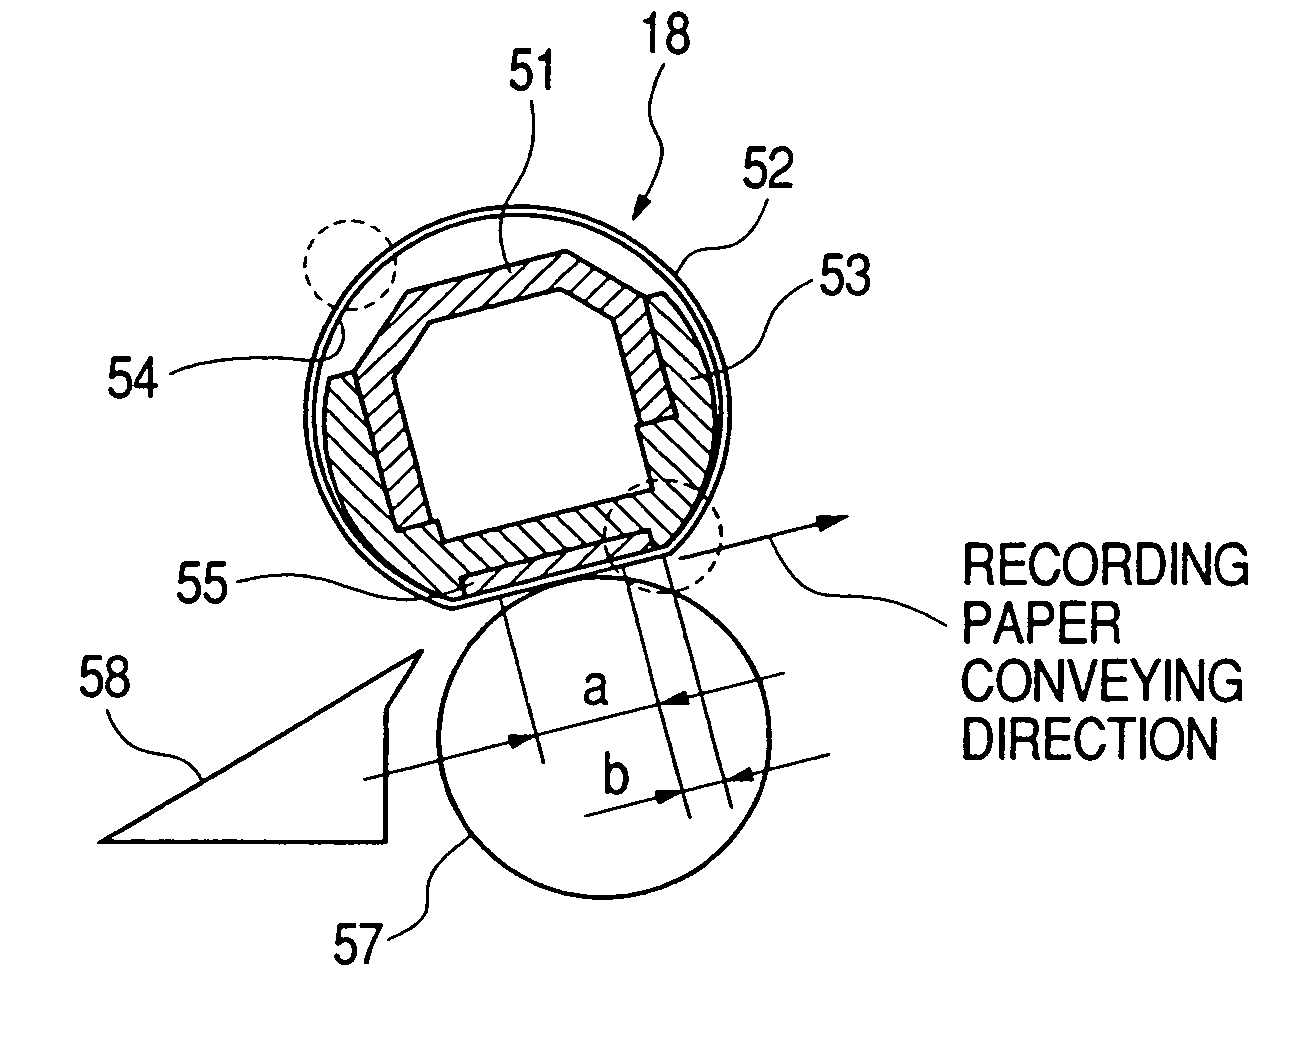 Image heating apparatus including rotary member with metal layer